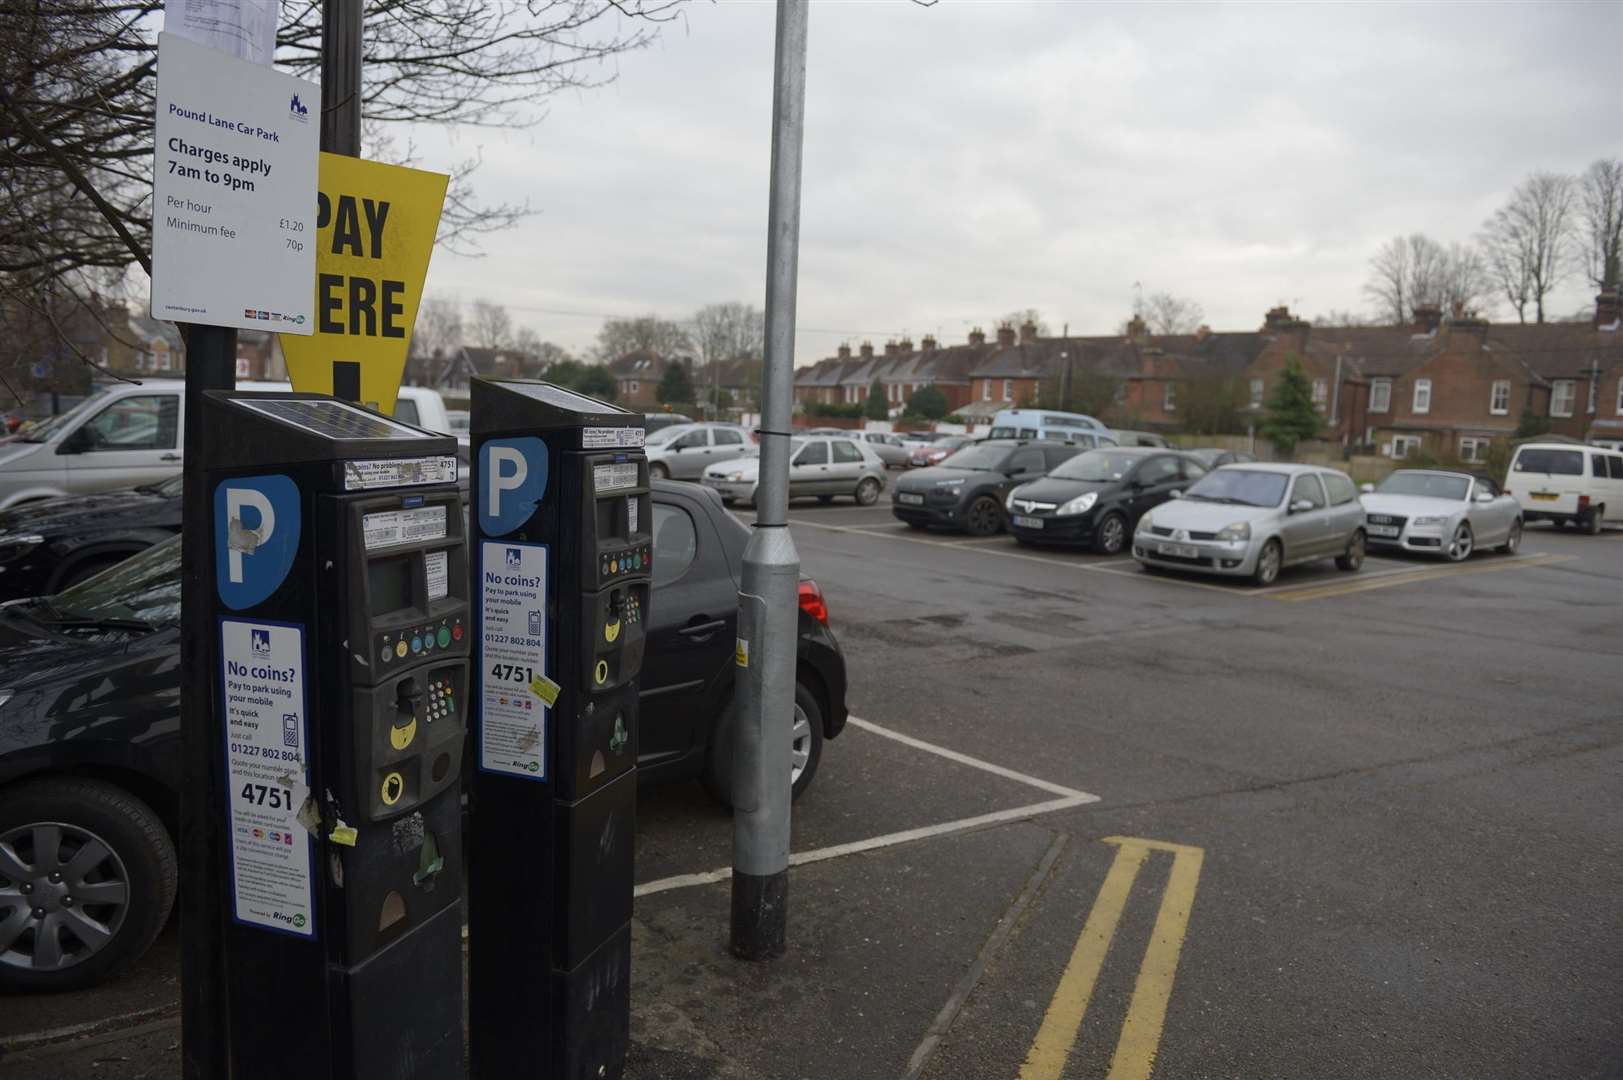 Pound Lane car park is being turned into an ANPR controlled parking area